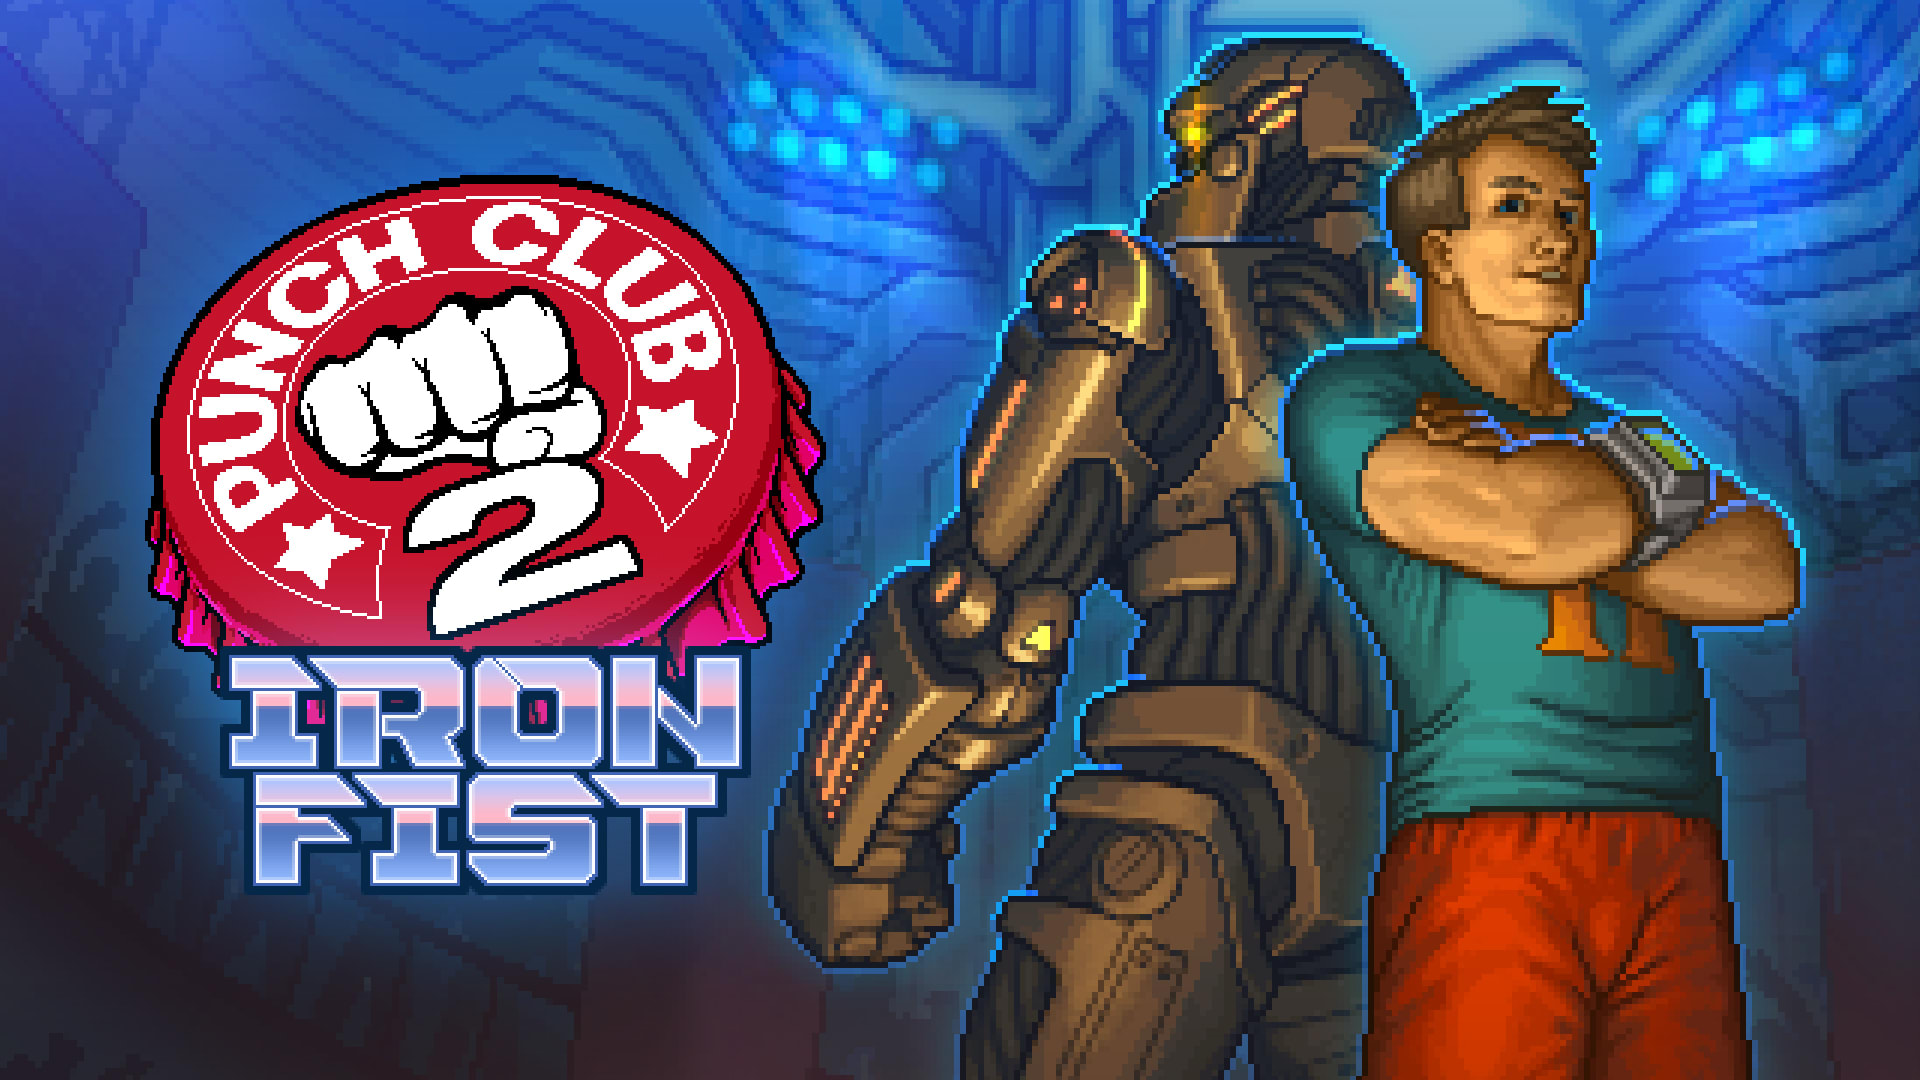 Punch Club 2: The Iron Fist